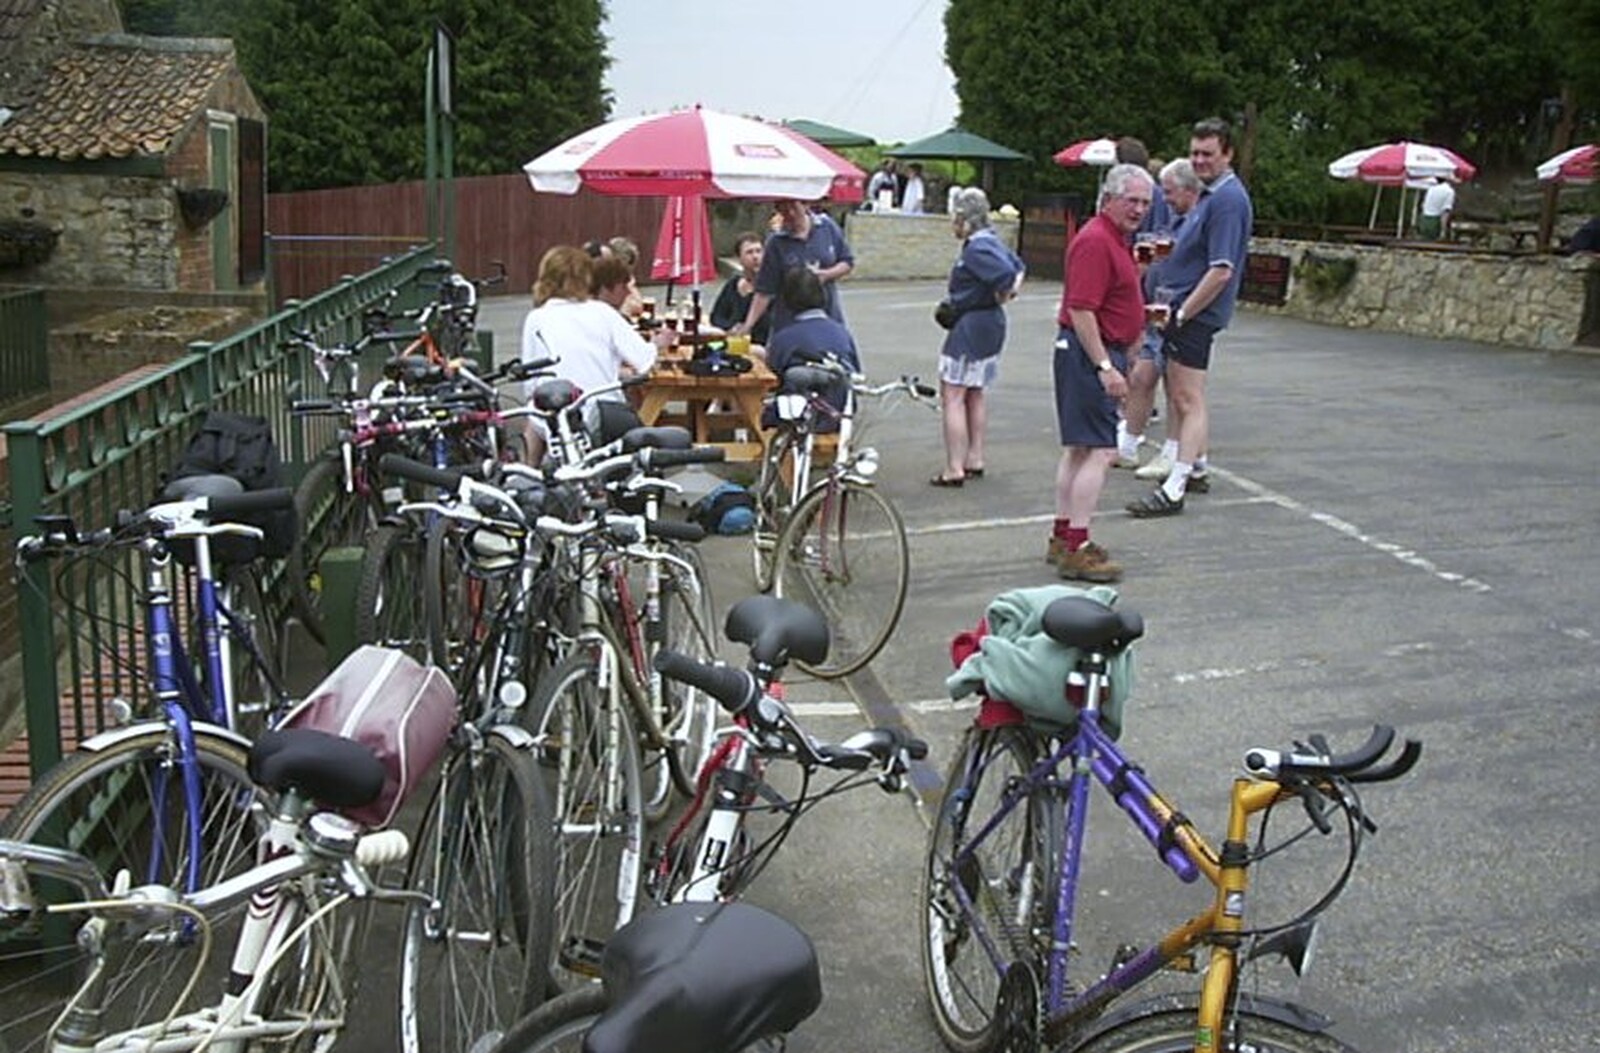 A pile of bikes from The BSCC Annual Bike Ride, Marquess of Exeter, Oakham, Rutland - 12th May 2001